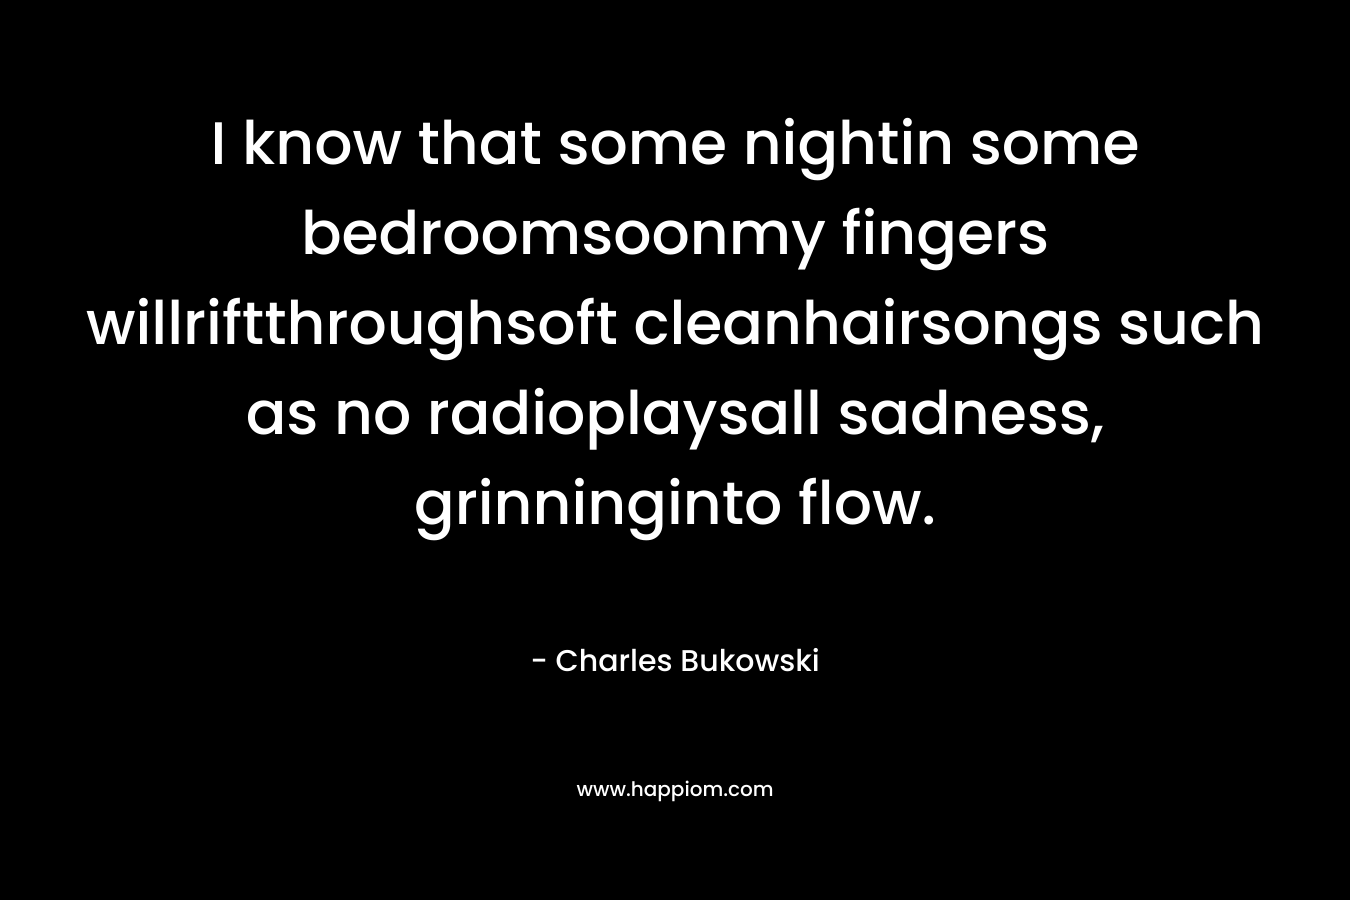 I know that some nightin some bedroomsoonmy fingers willriftthroughsoft cleanhairsongs such as no radioplaysall sadness, grinninginto flow. – Charles Bukowski